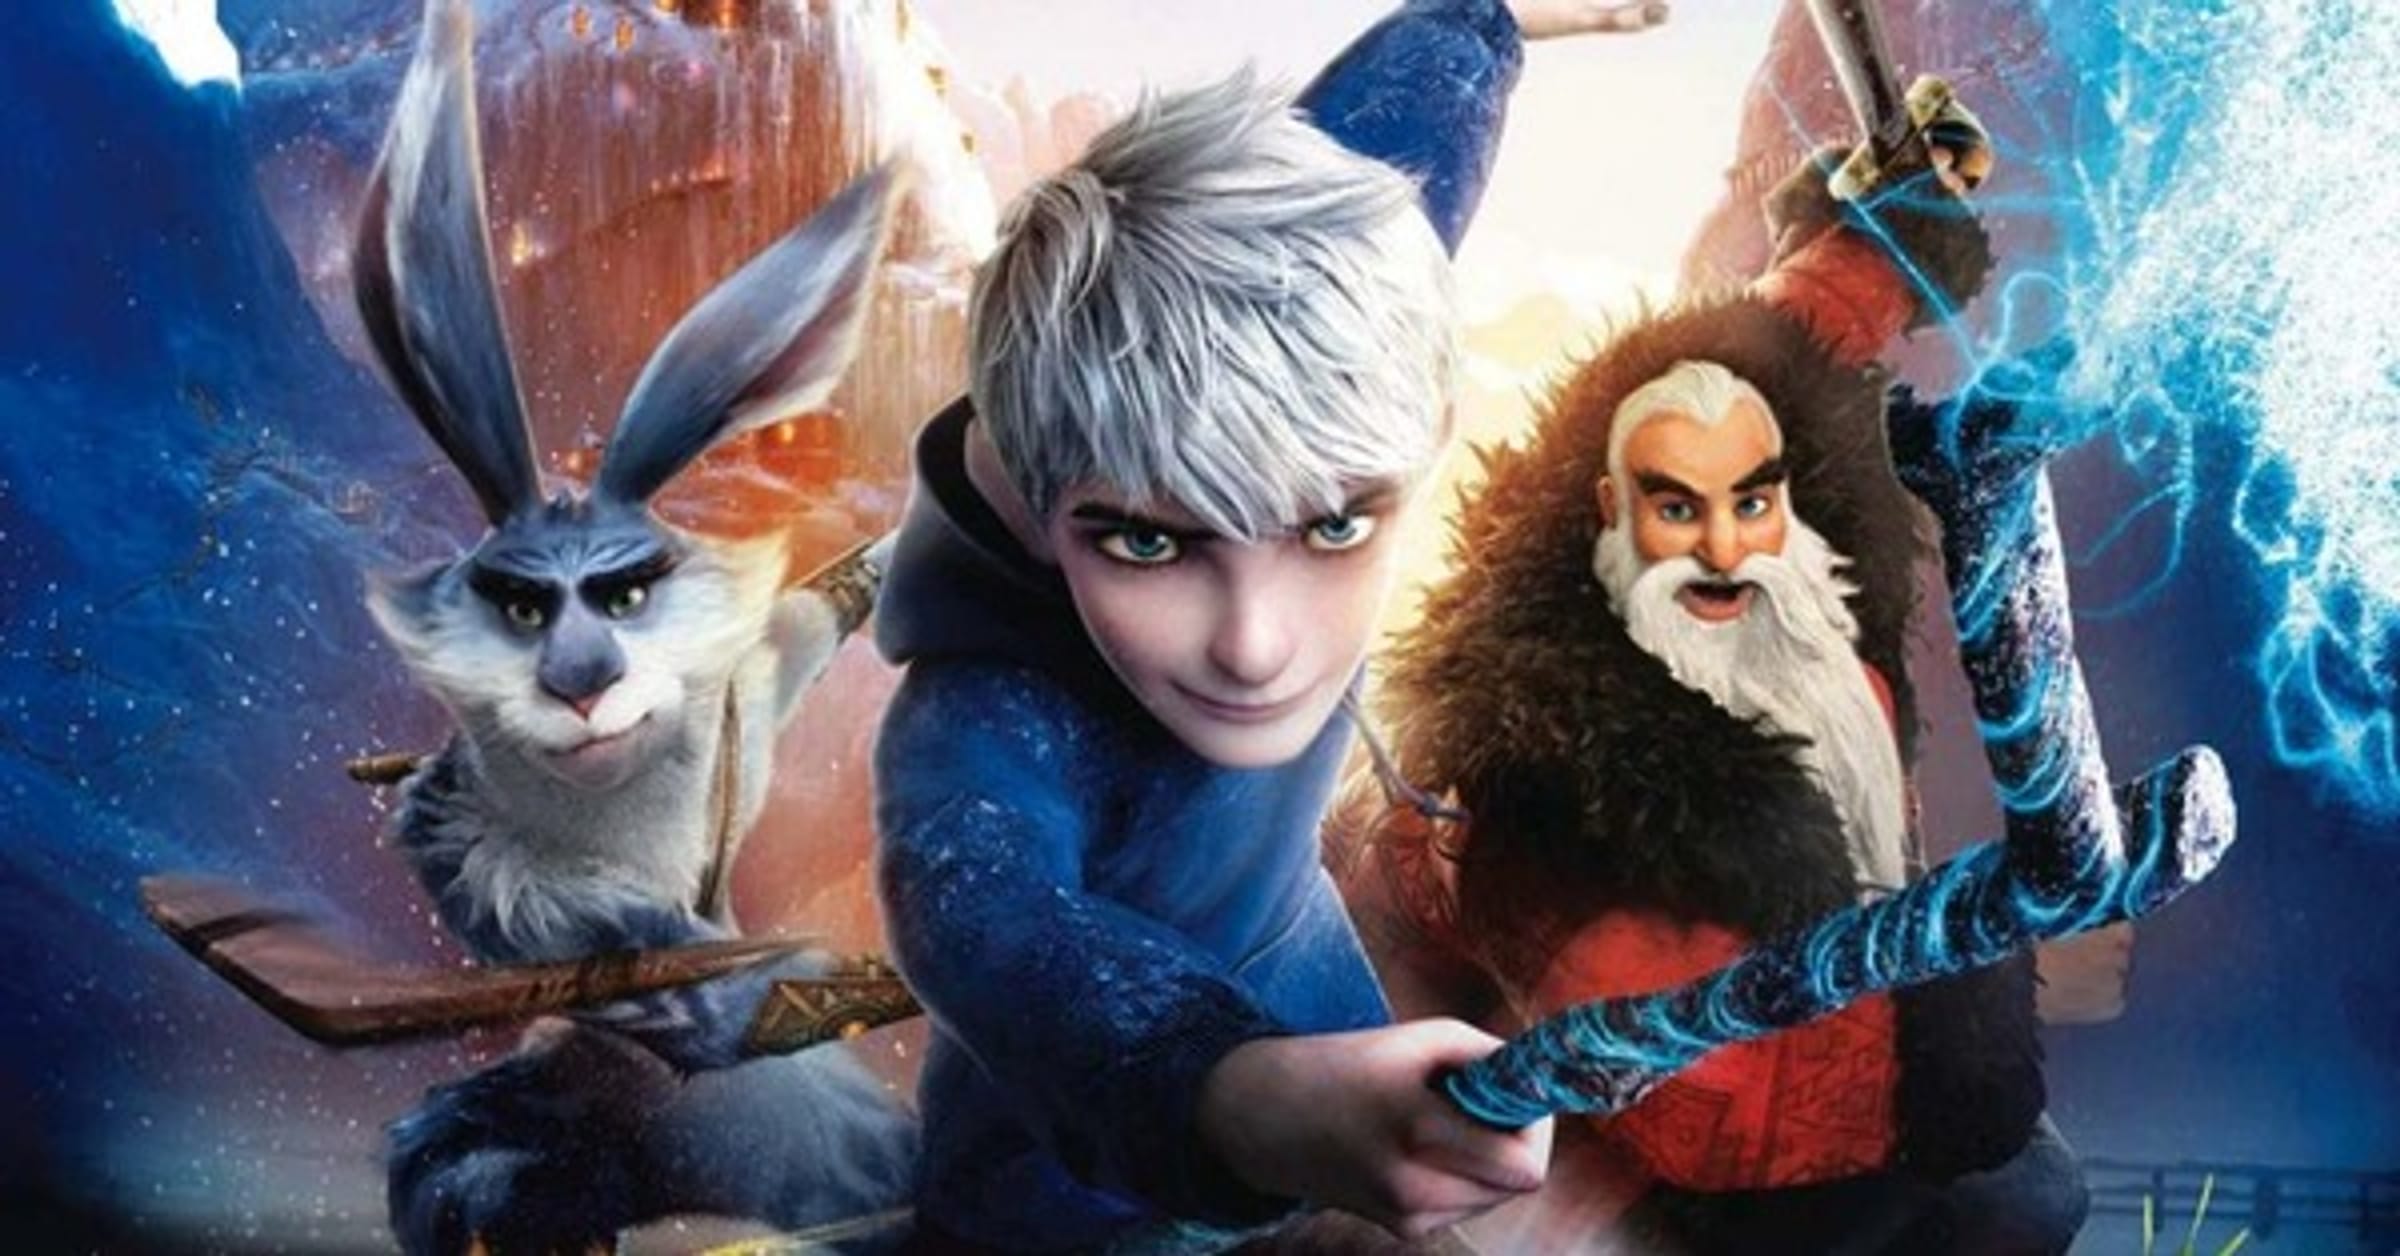 santa from rise of the guardians